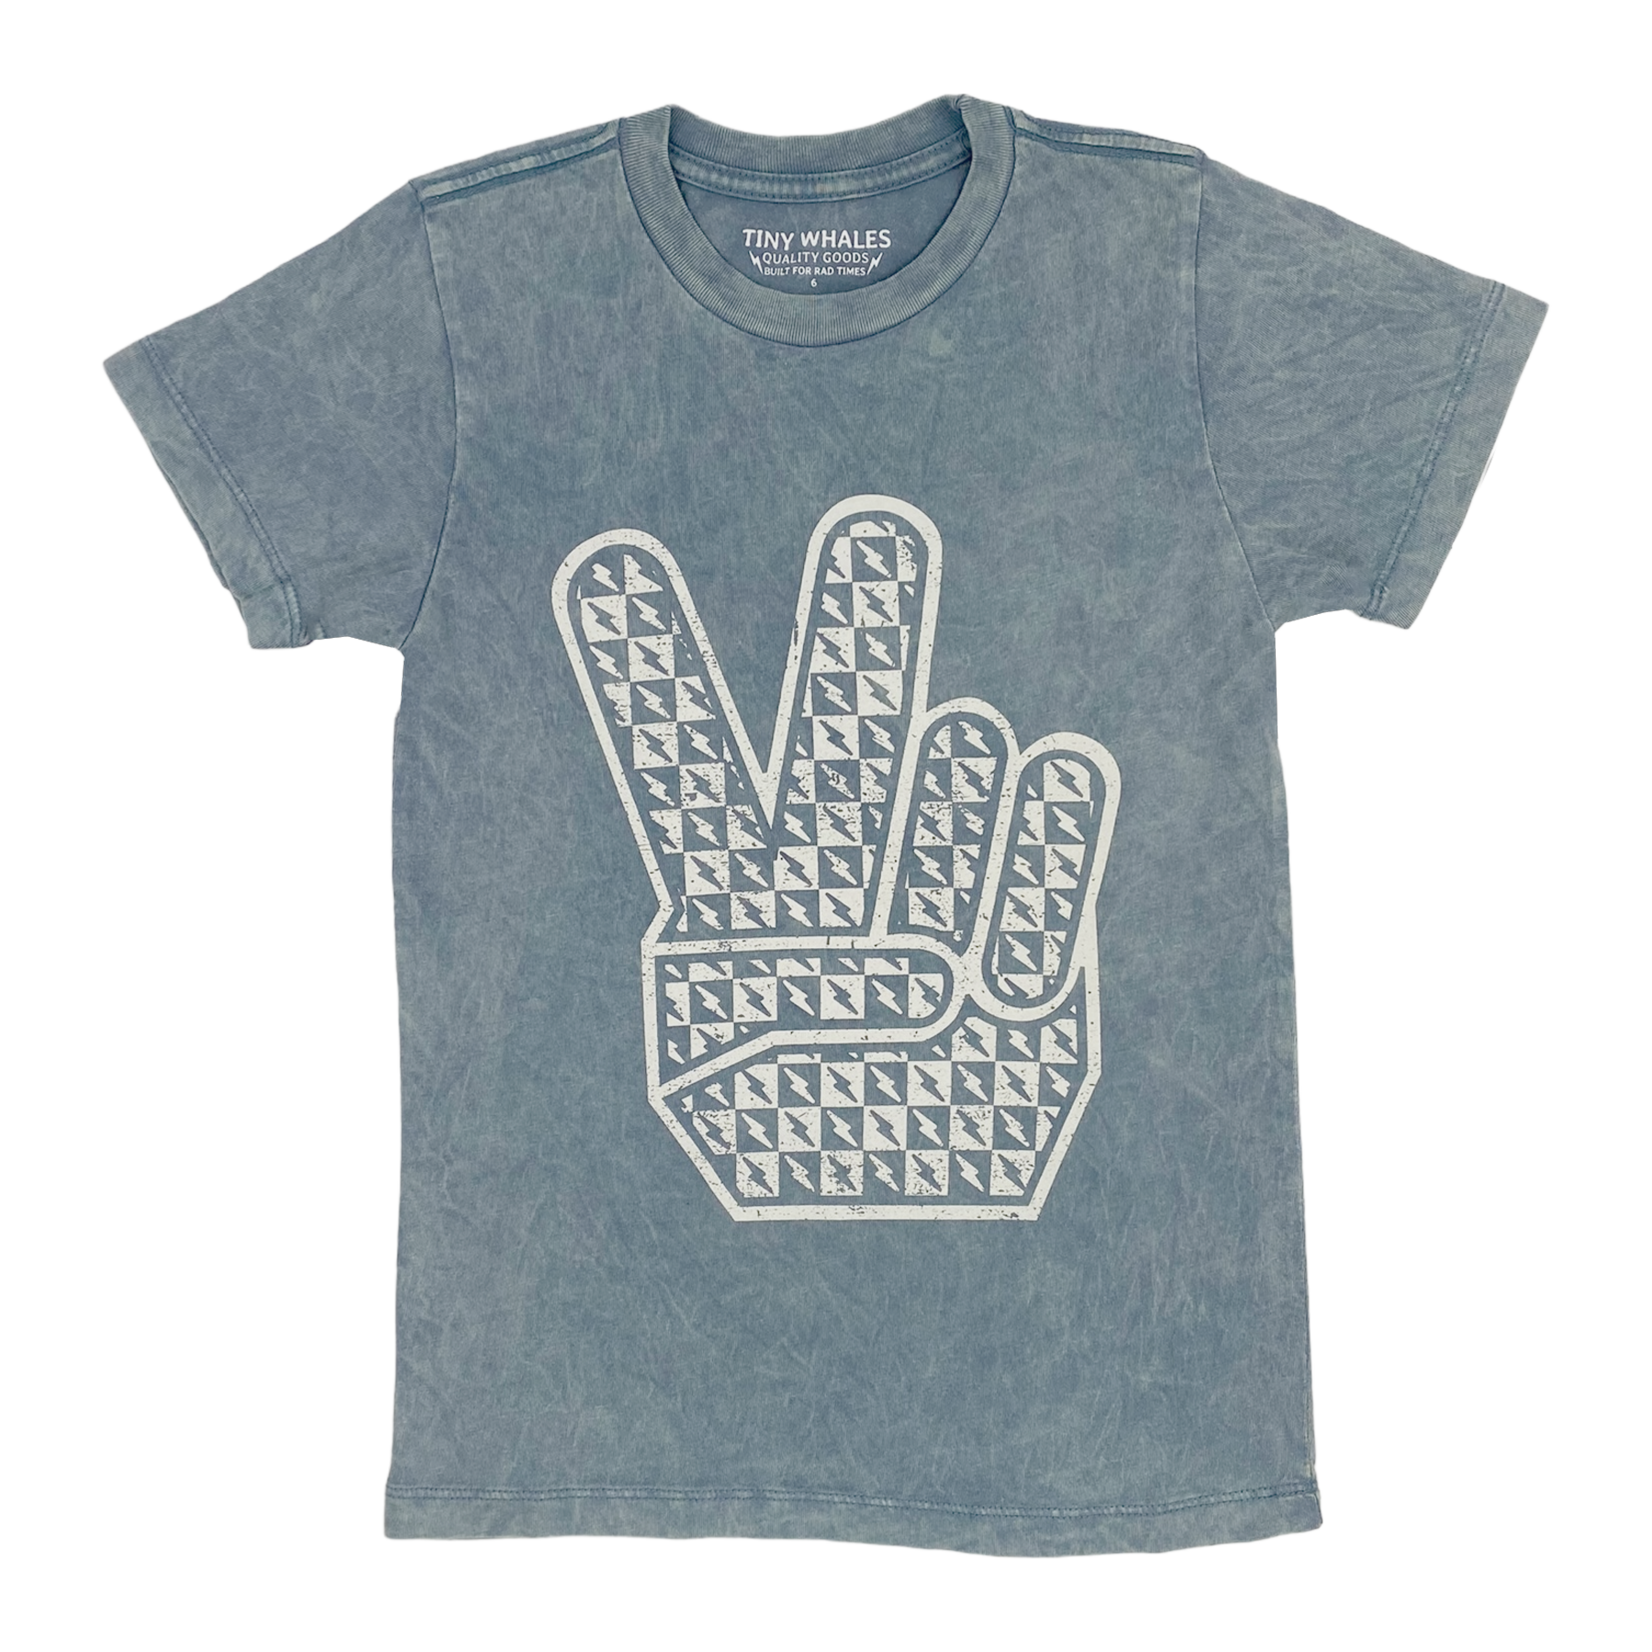 Tiny Whales Tiny Whales Mineral River Peace Out Tee Shirt